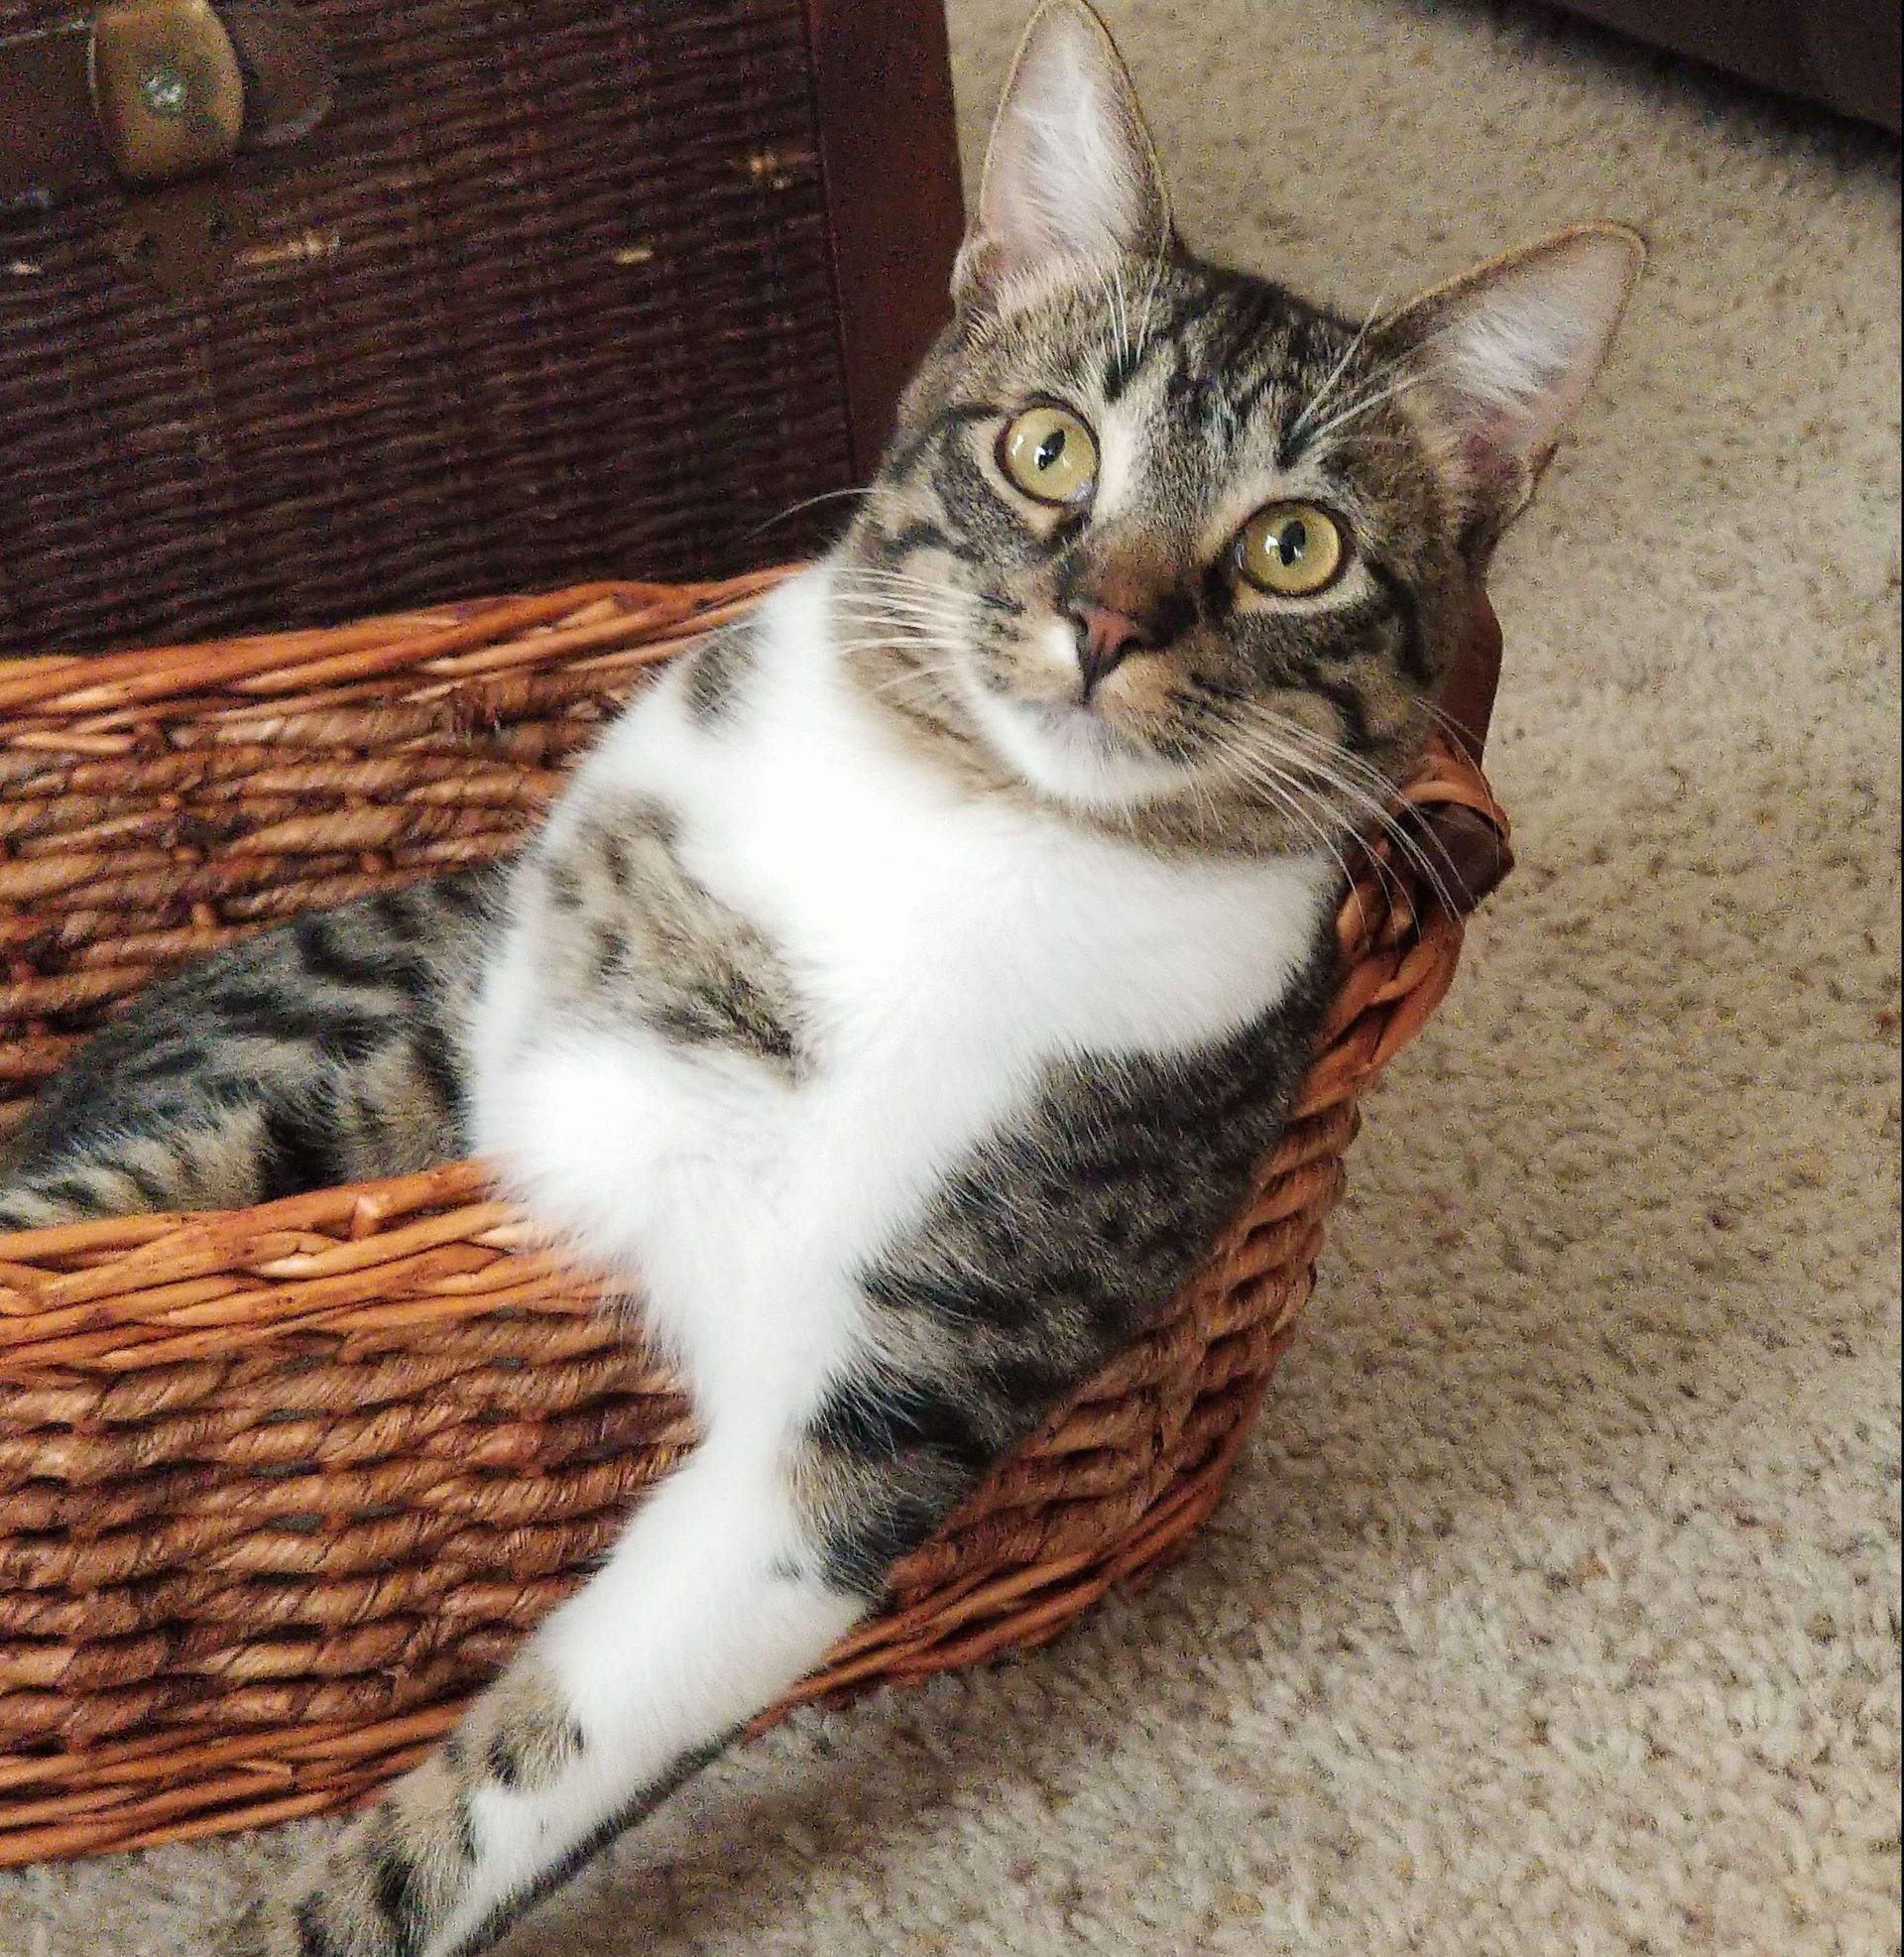 cat on the basket